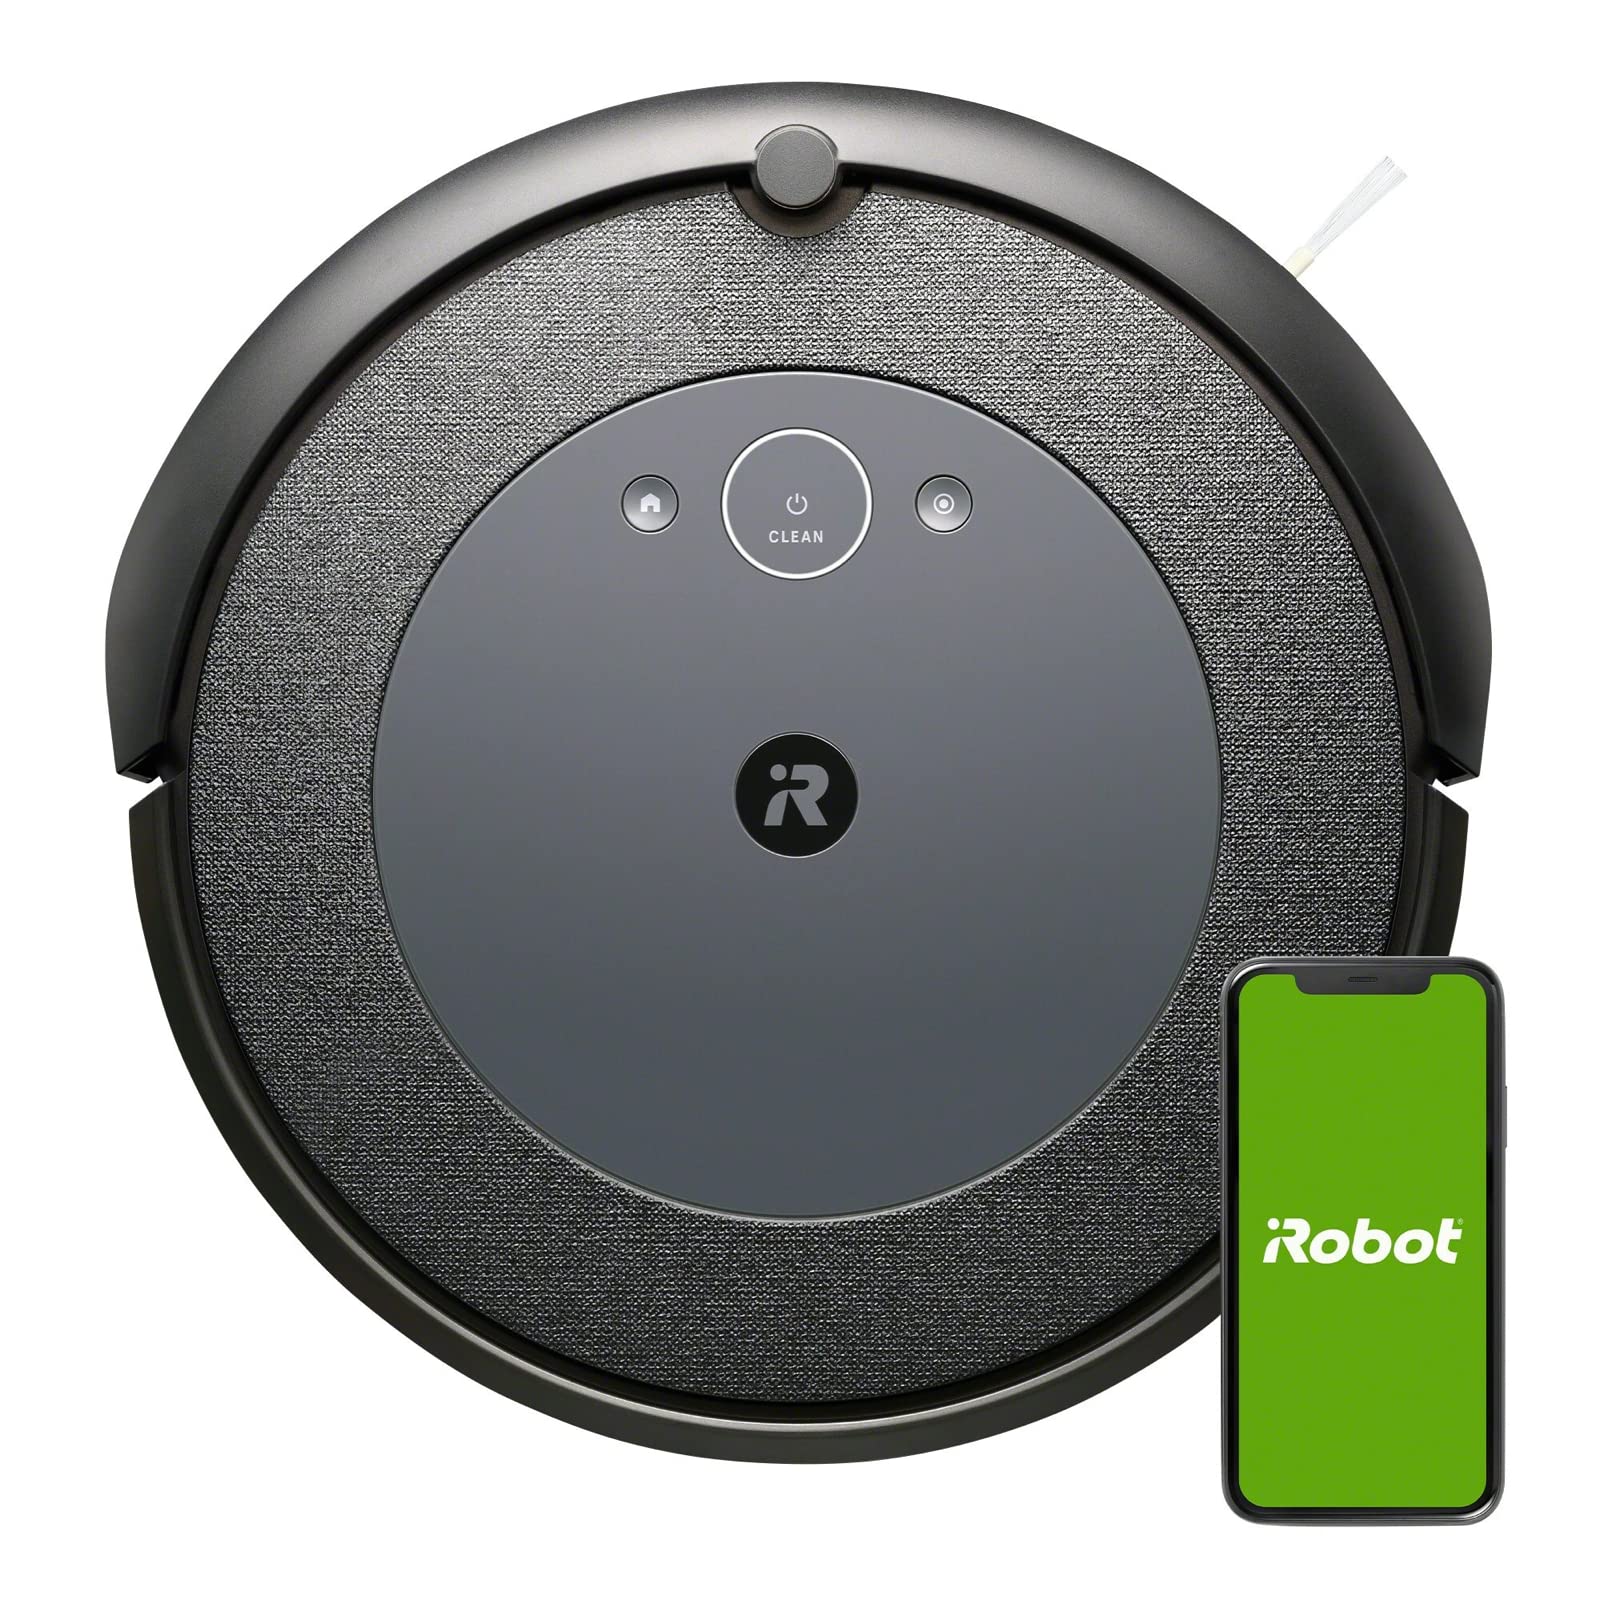 Get The IRobot Roomba Robot Vacuum For Only $149.99